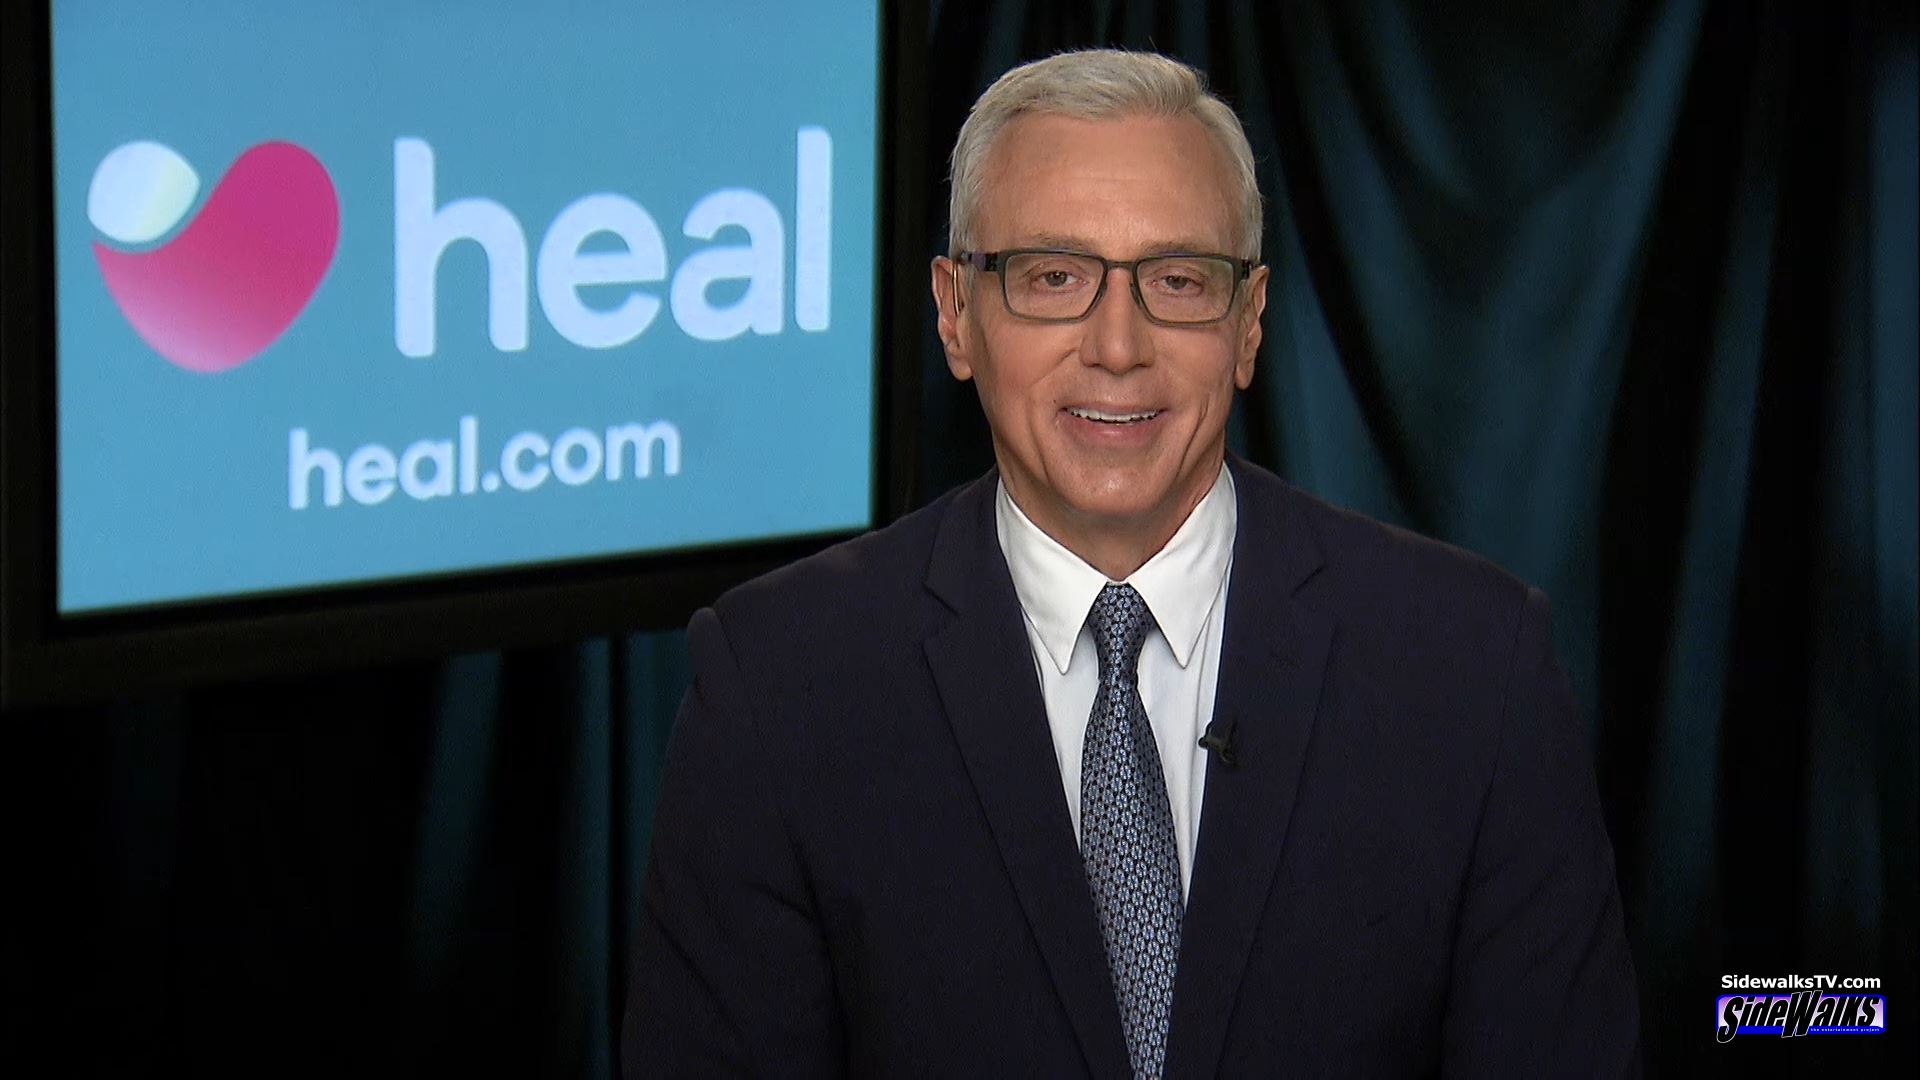 Screen capture of our interview with Dr. Drew